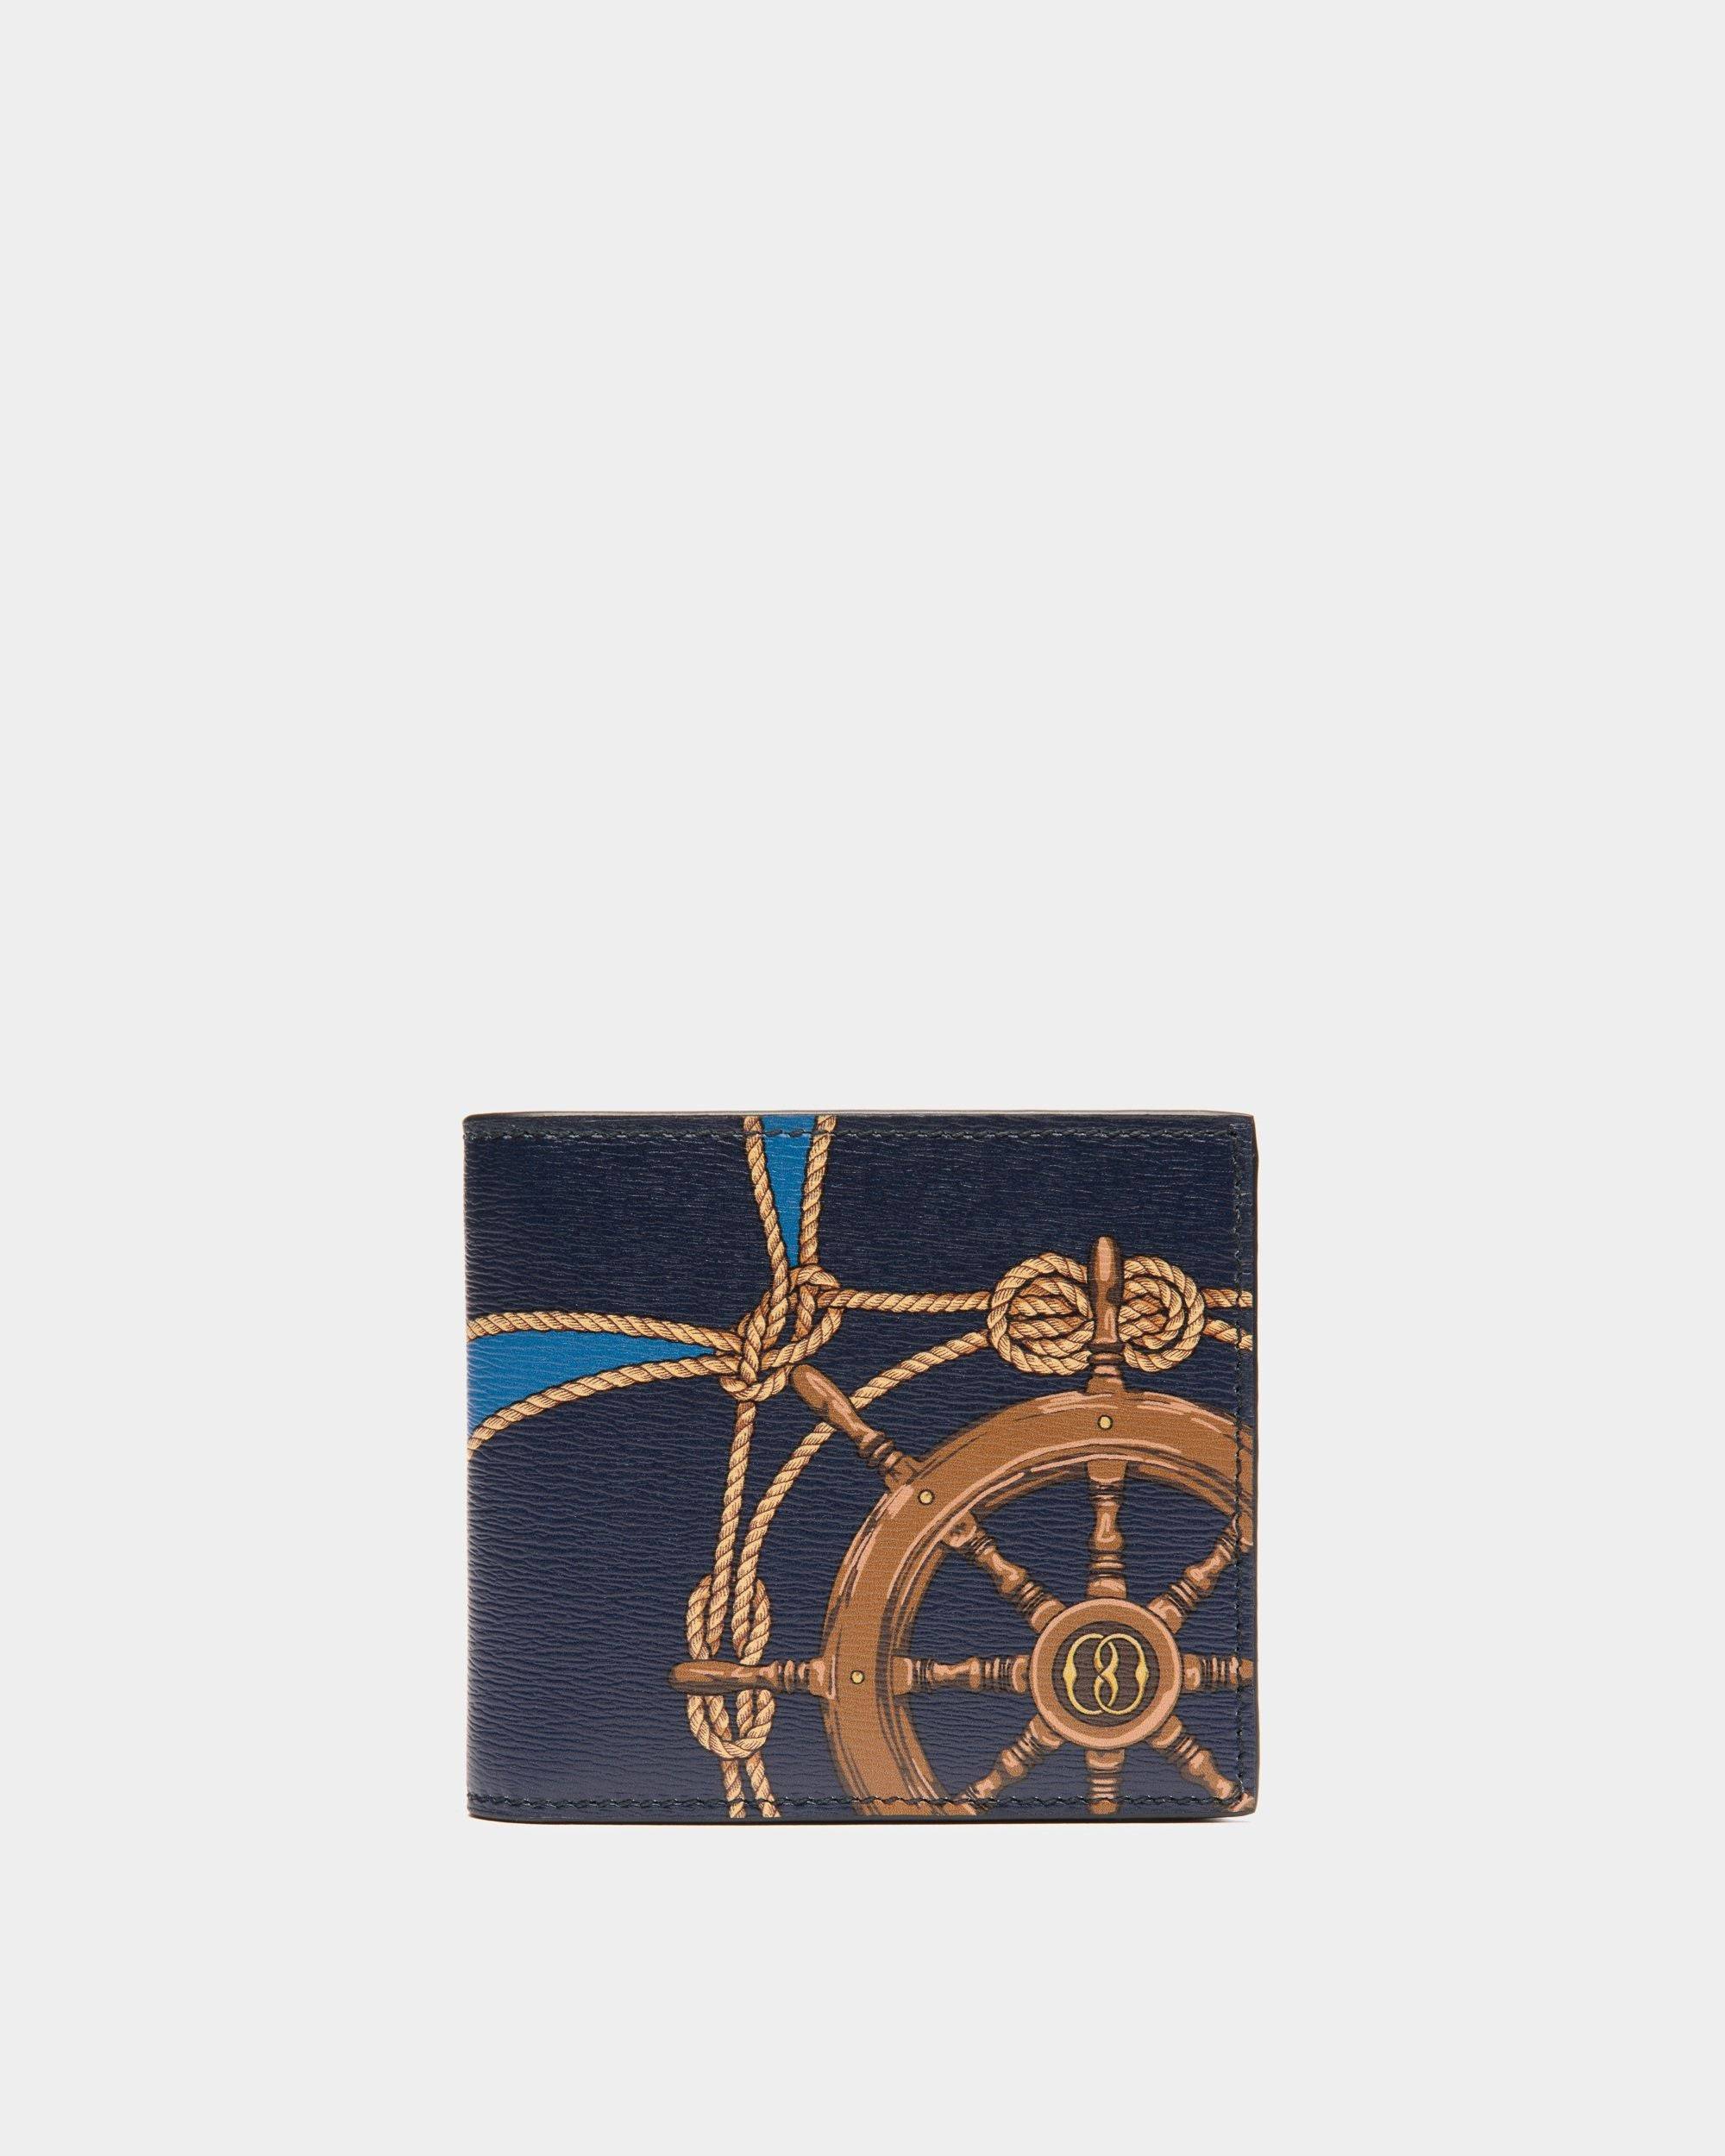 Crossing | Men's Bifold Wallet in Blue Leather | Bally | Still Life Front